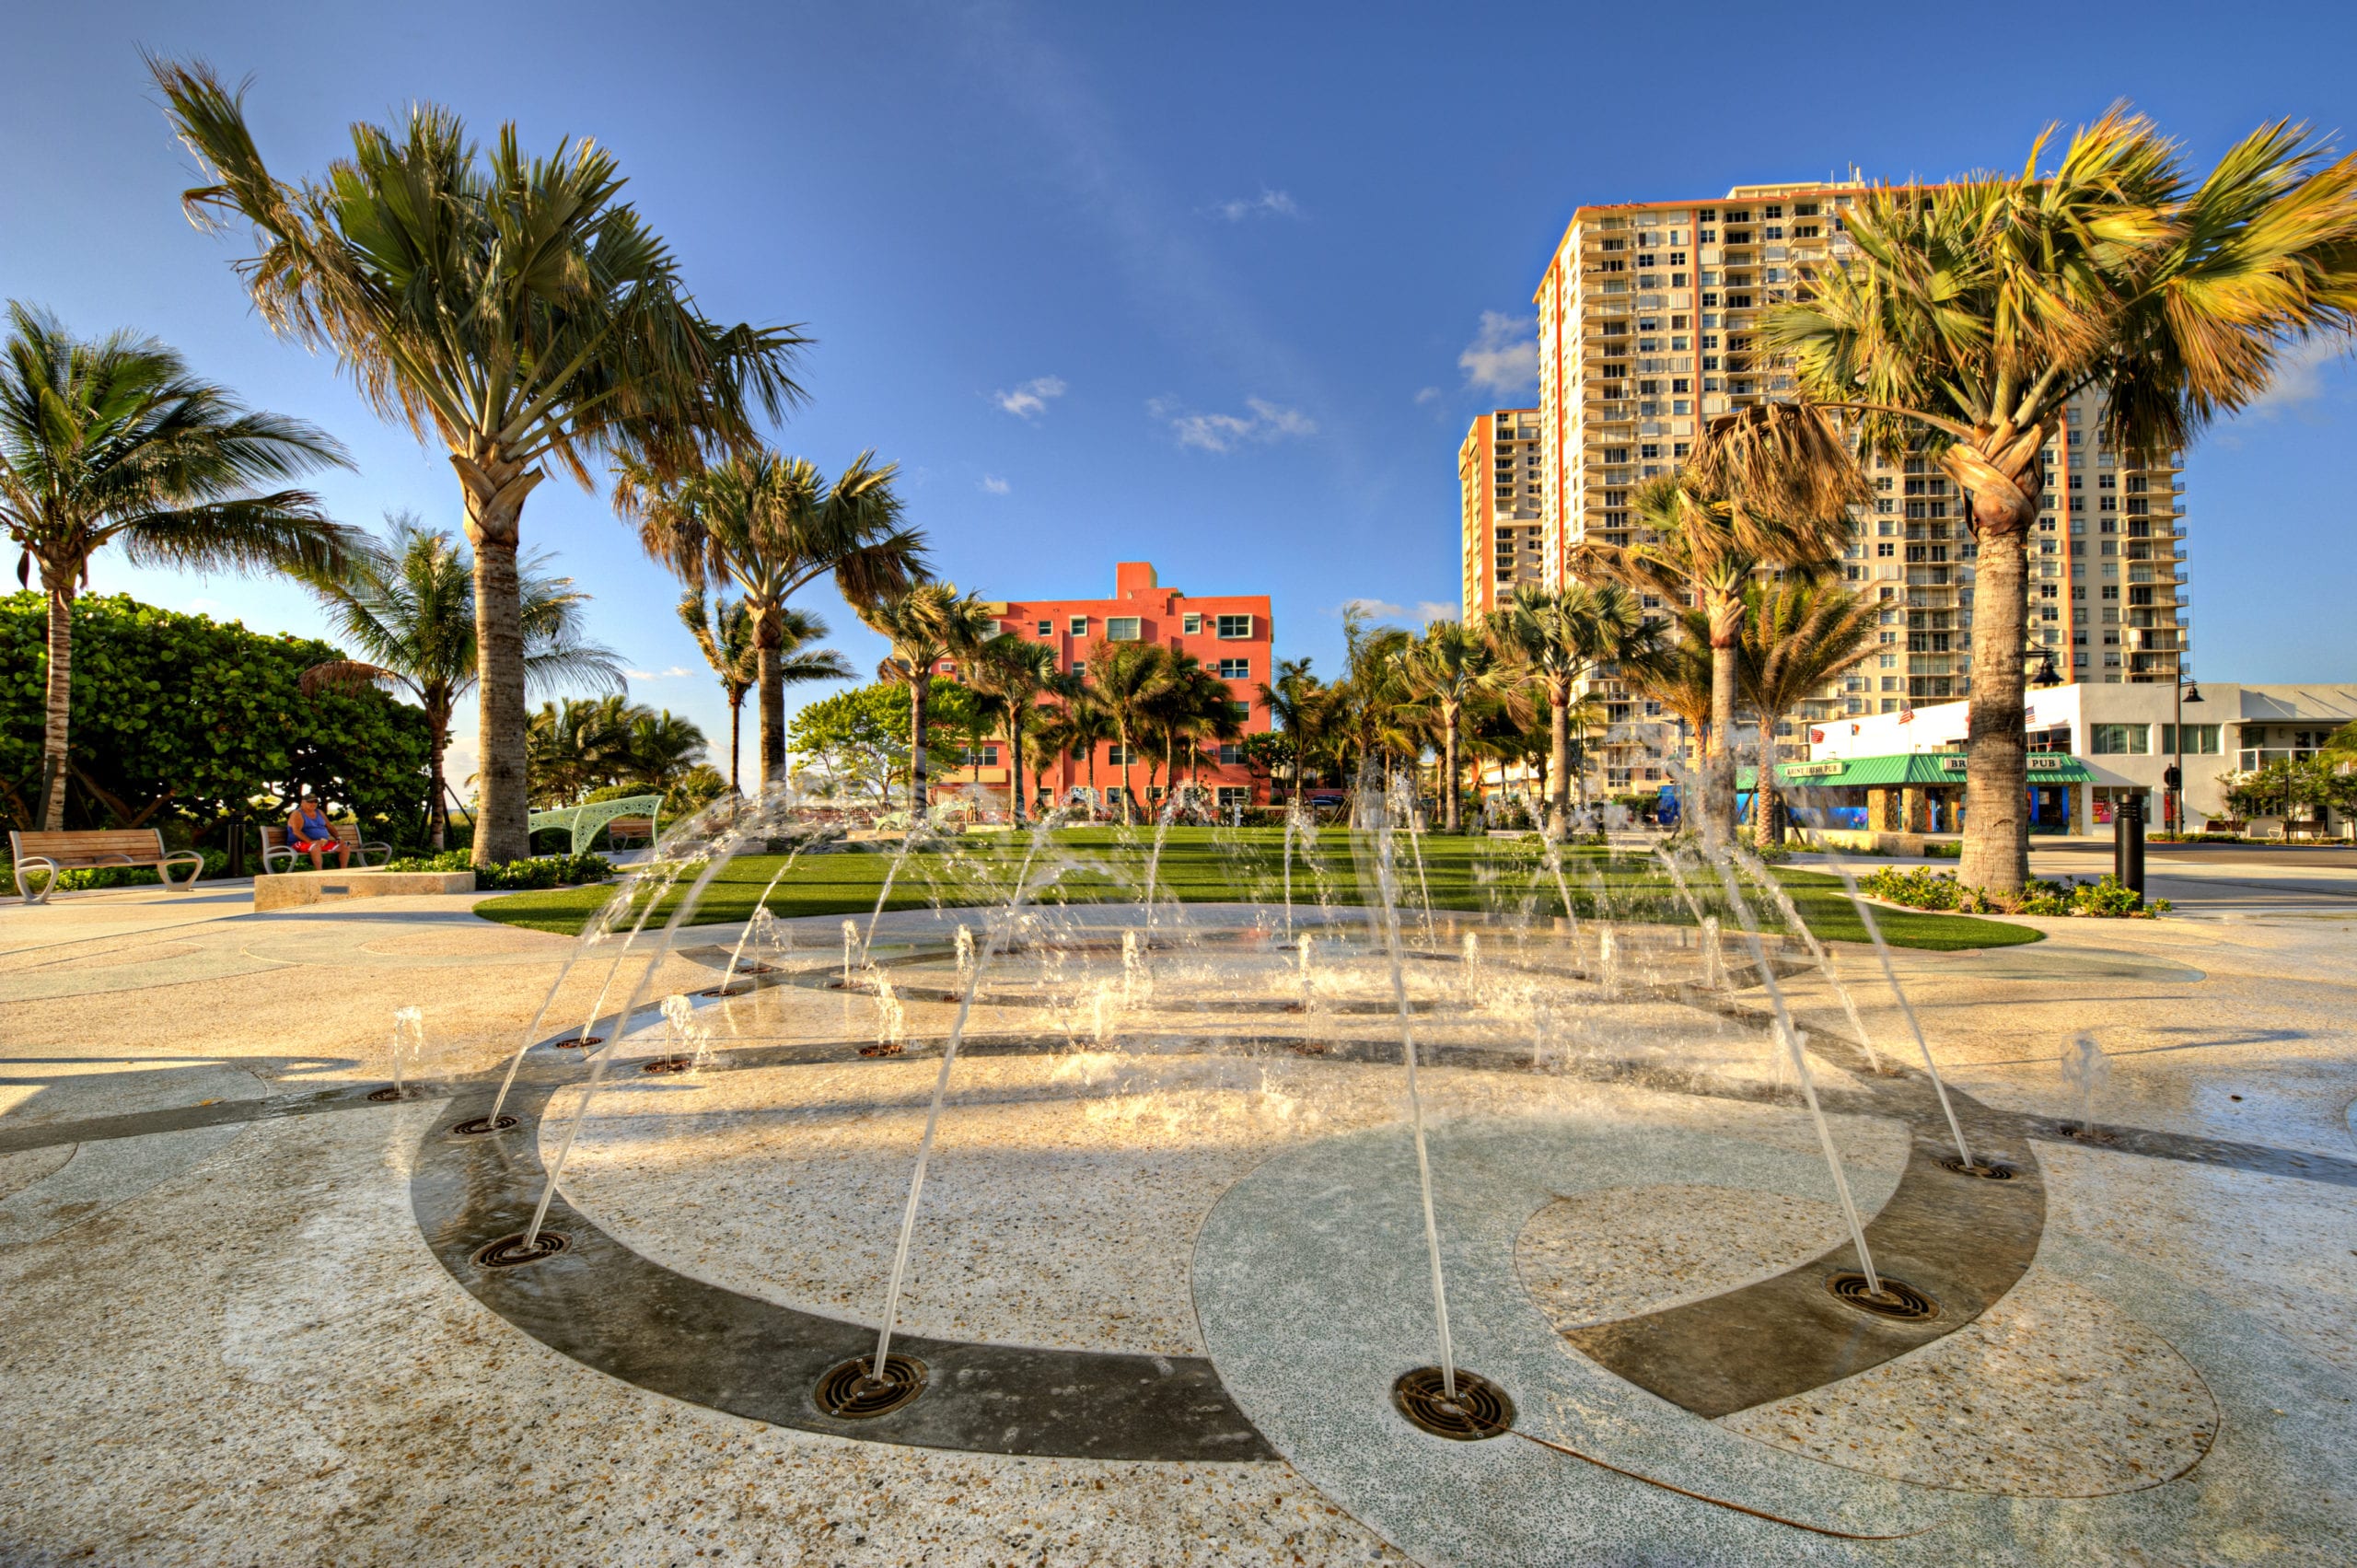 EDSA Pompano Beach Boulevard grounds with fountain water pool and palm trees